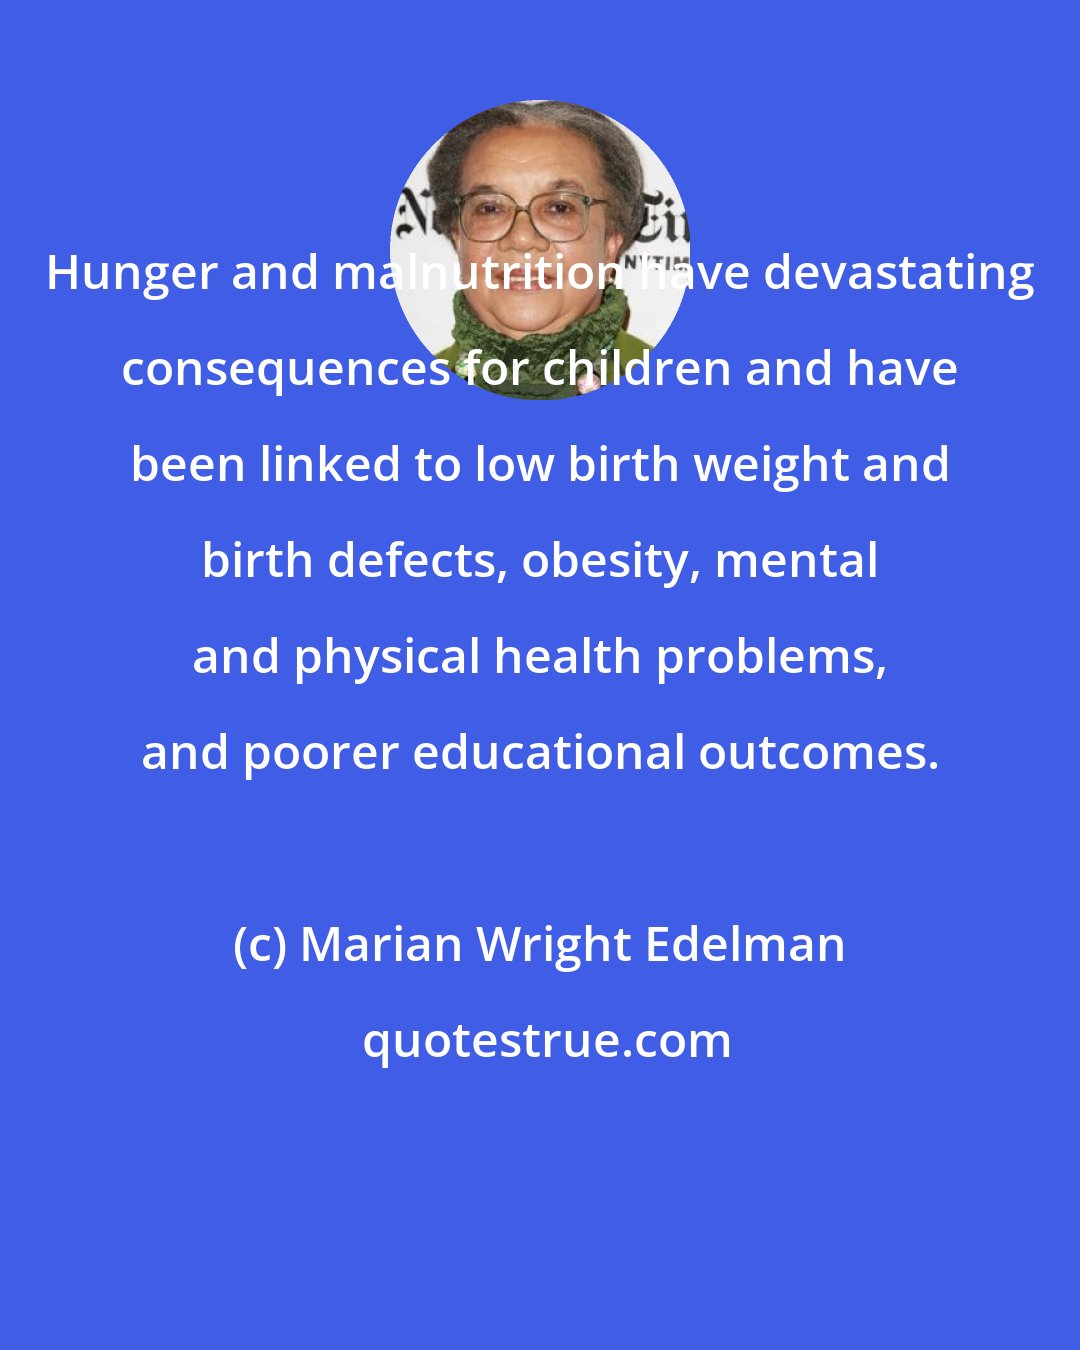 Marian Wright Edelman: Hunger and malnutrition have devastating consequences for children and have been linked to low birth weight and birth defects, obesity, mental and physical health problems, and poorer educational outcomes.